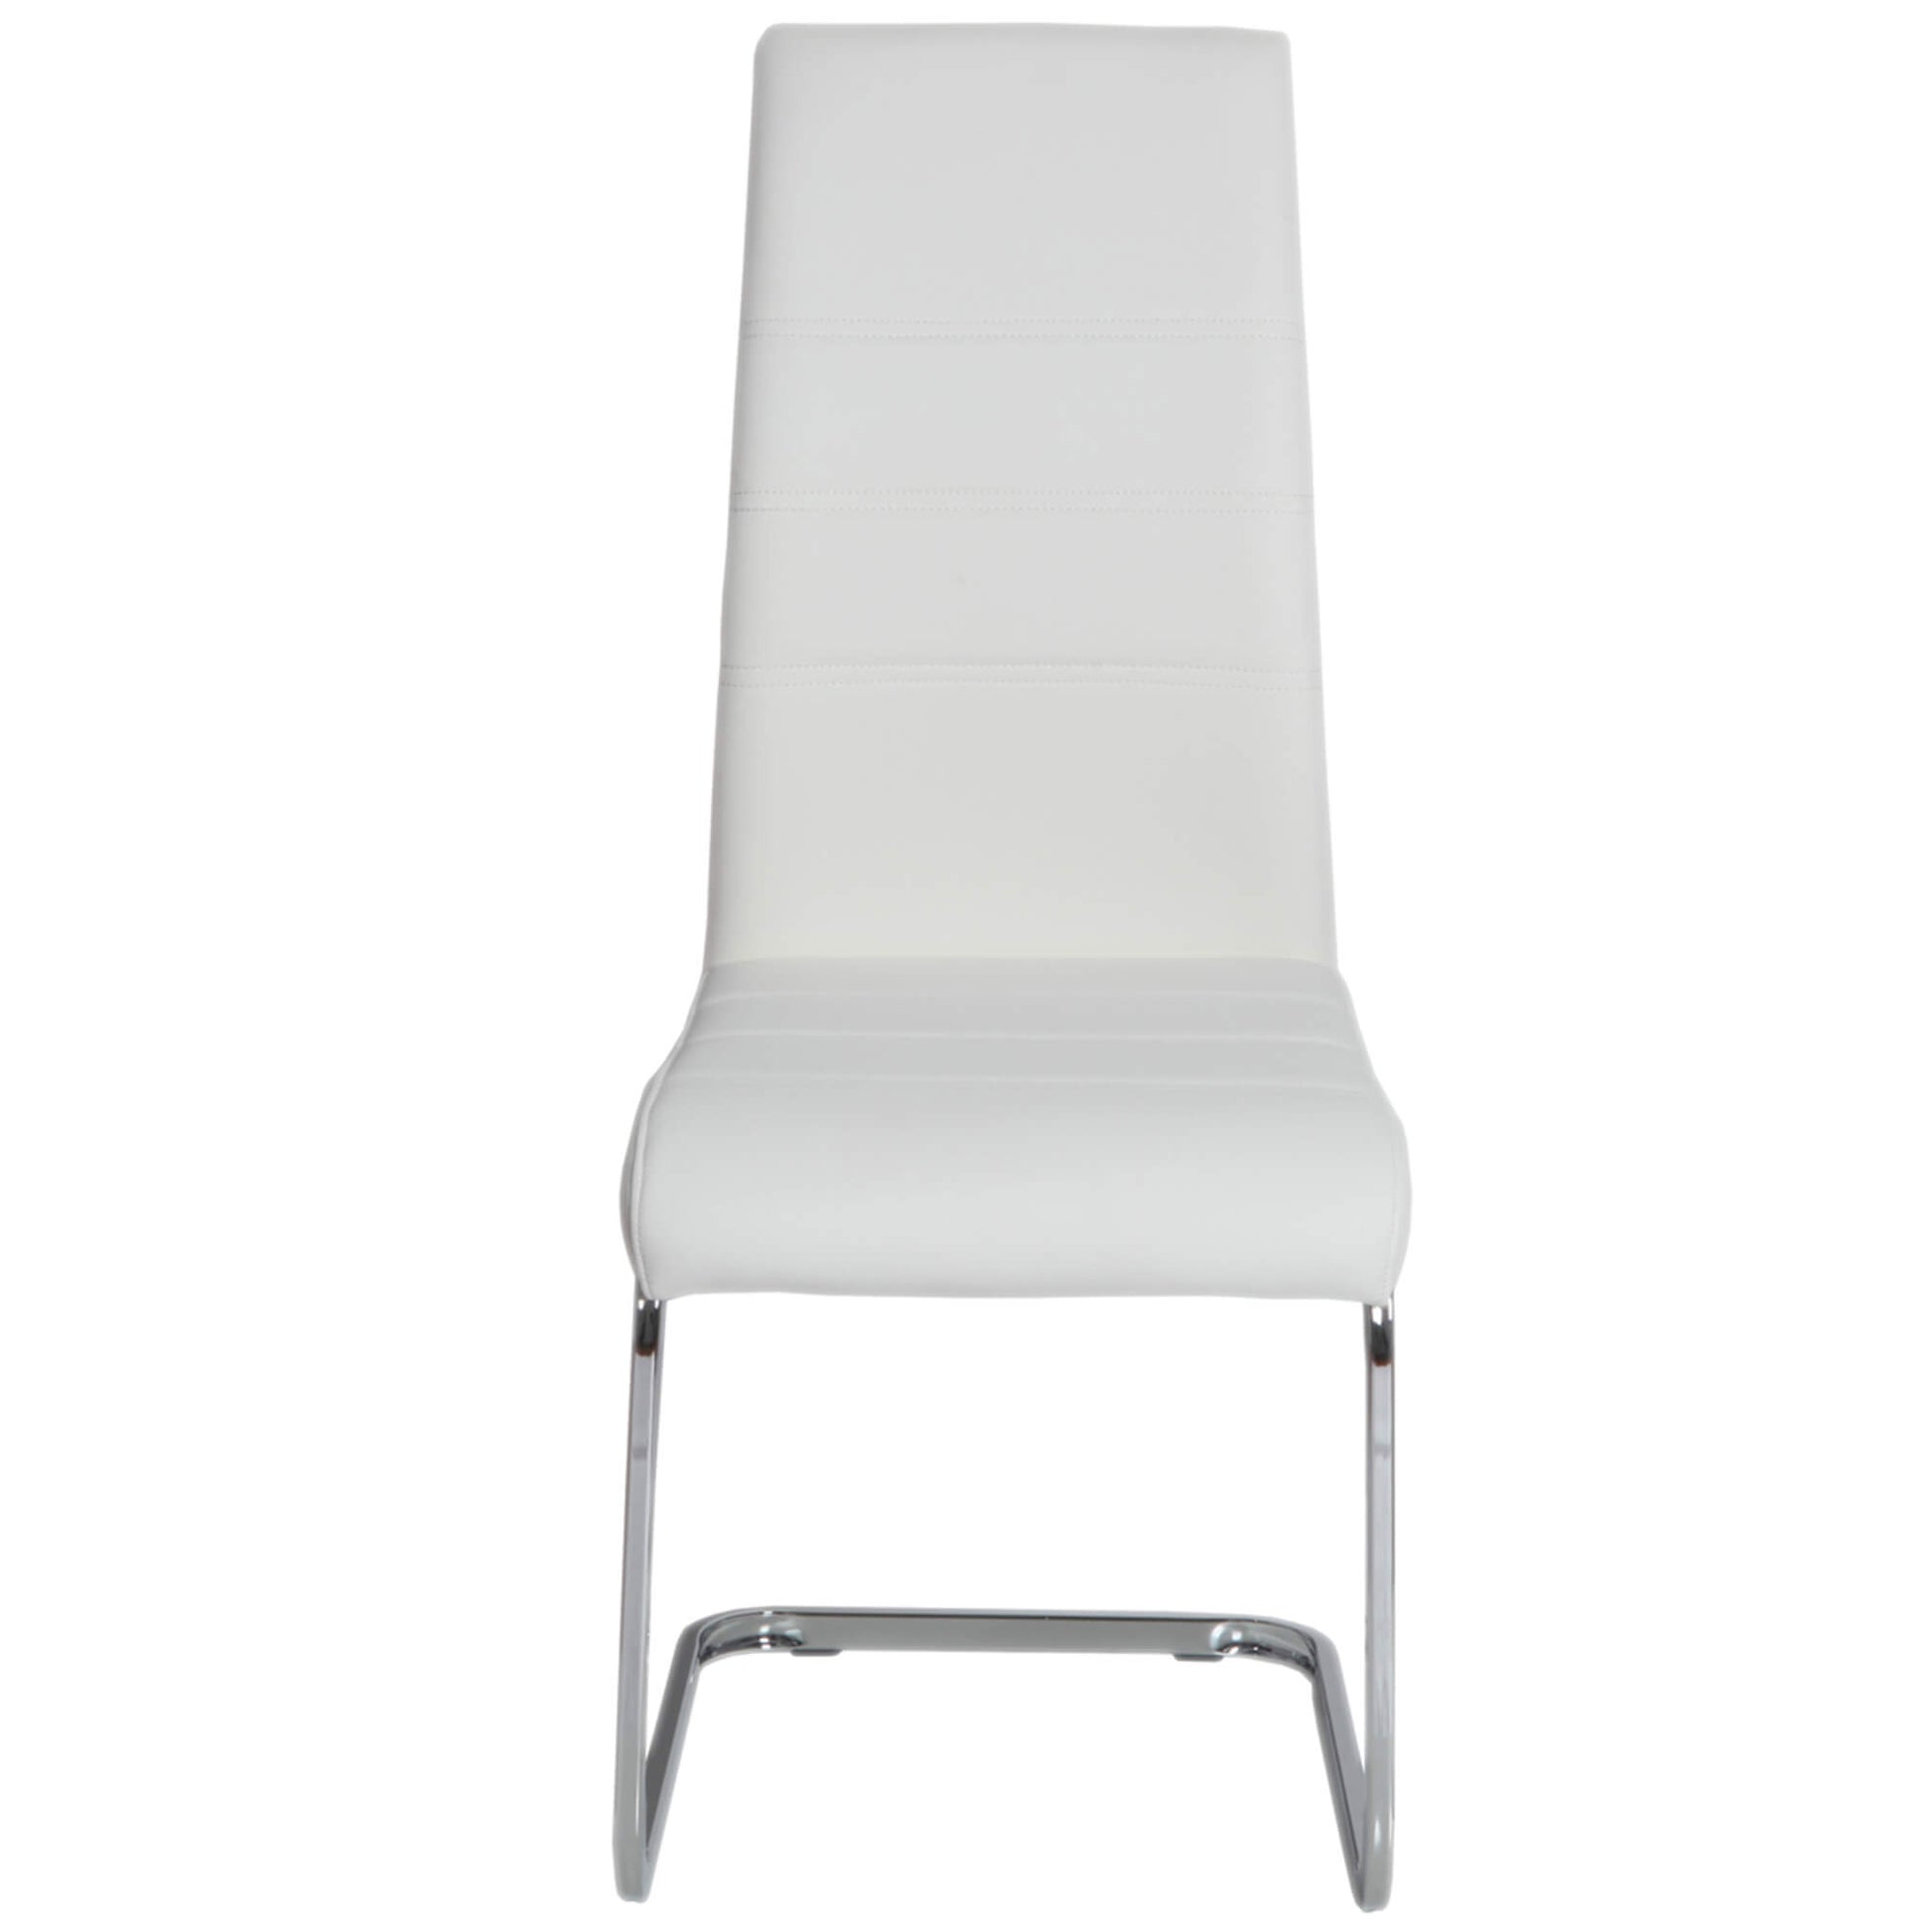 Montessa | Modern, Metal PU Leather Dining Chairs | Set Of 4 | White